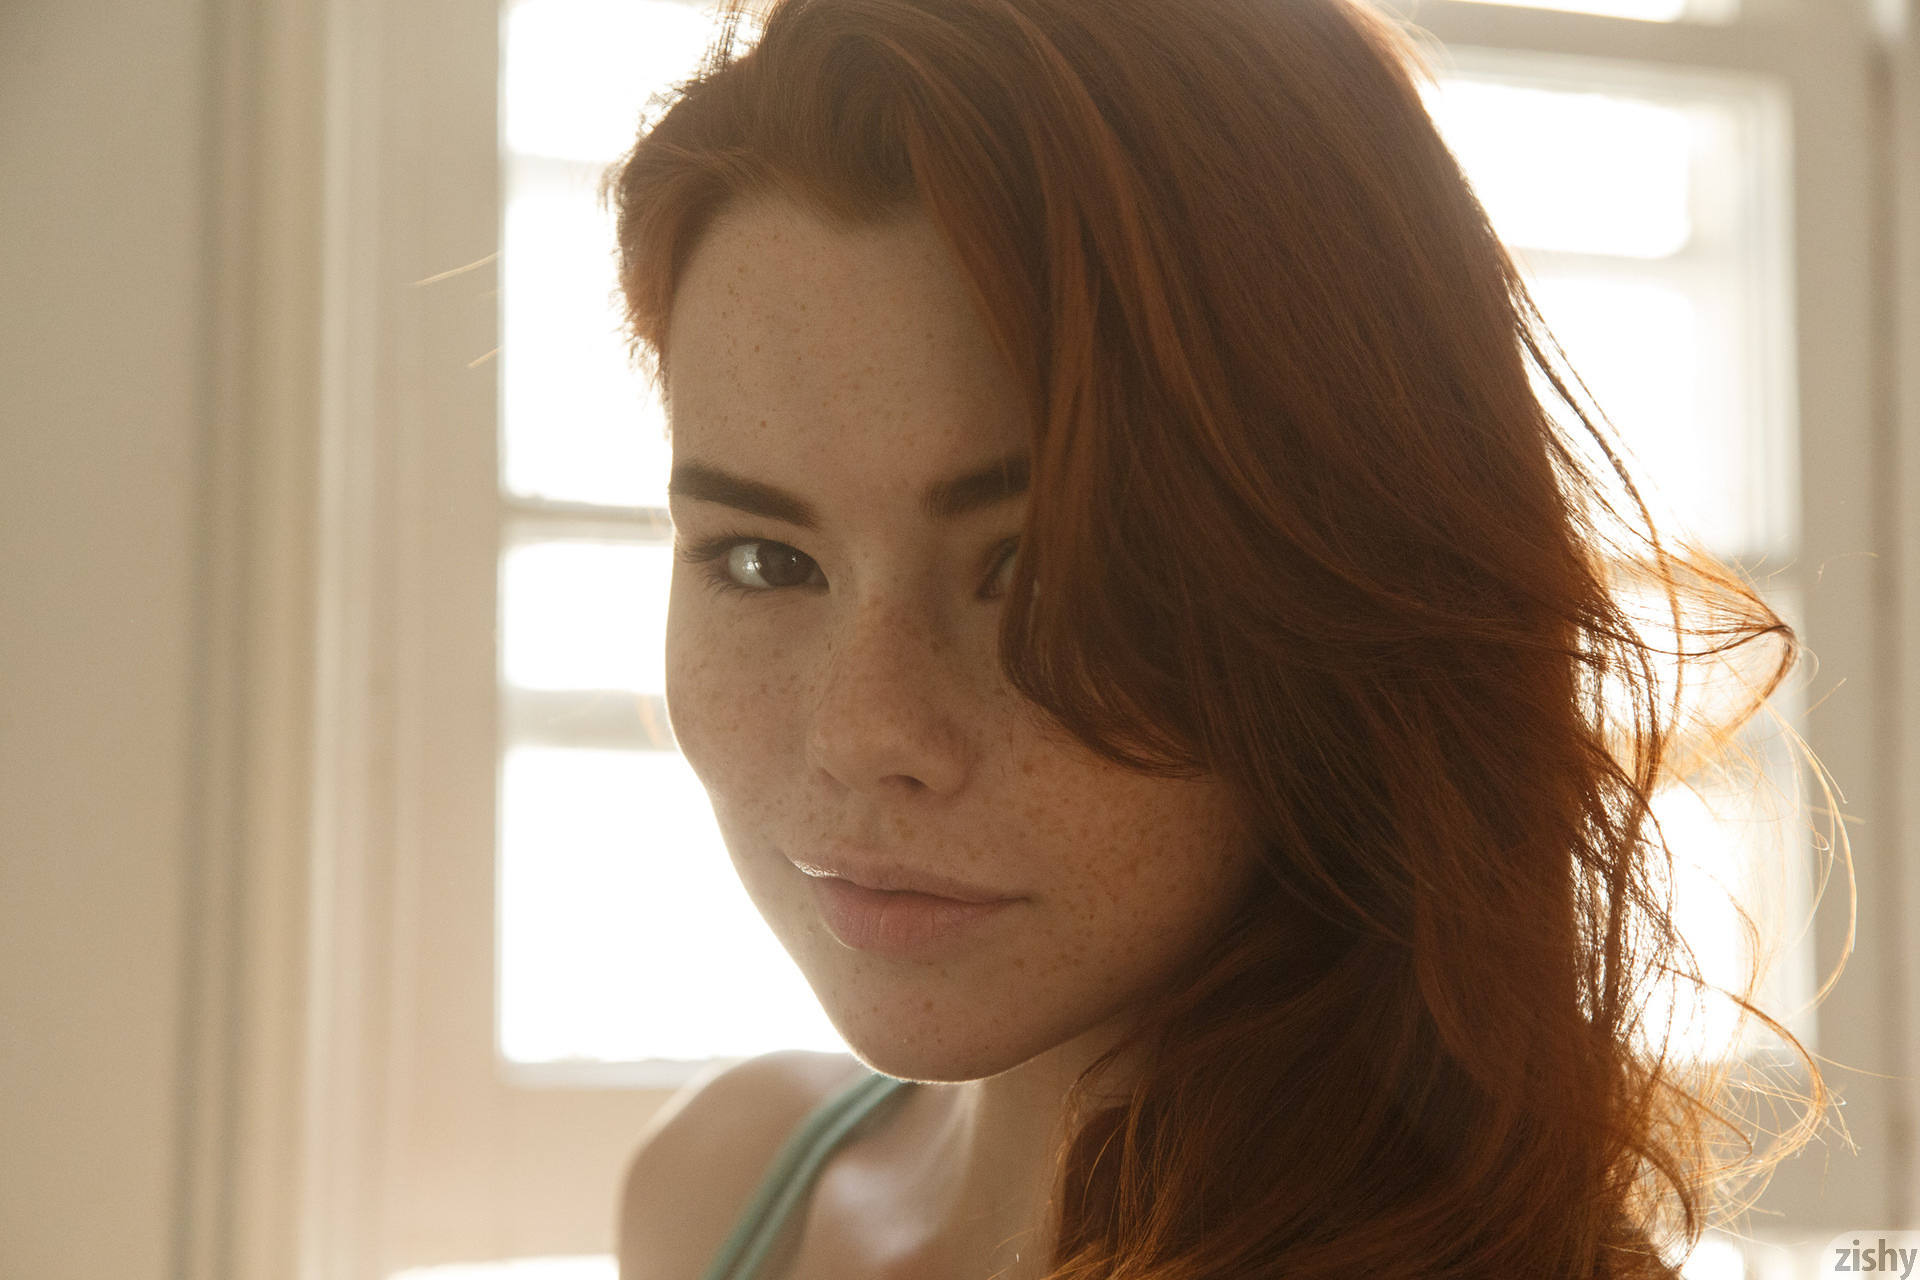 People 1920x1280 women model redhead long hair Sabrina Lynn freckles looking at viewer face portrait watermarked closeup